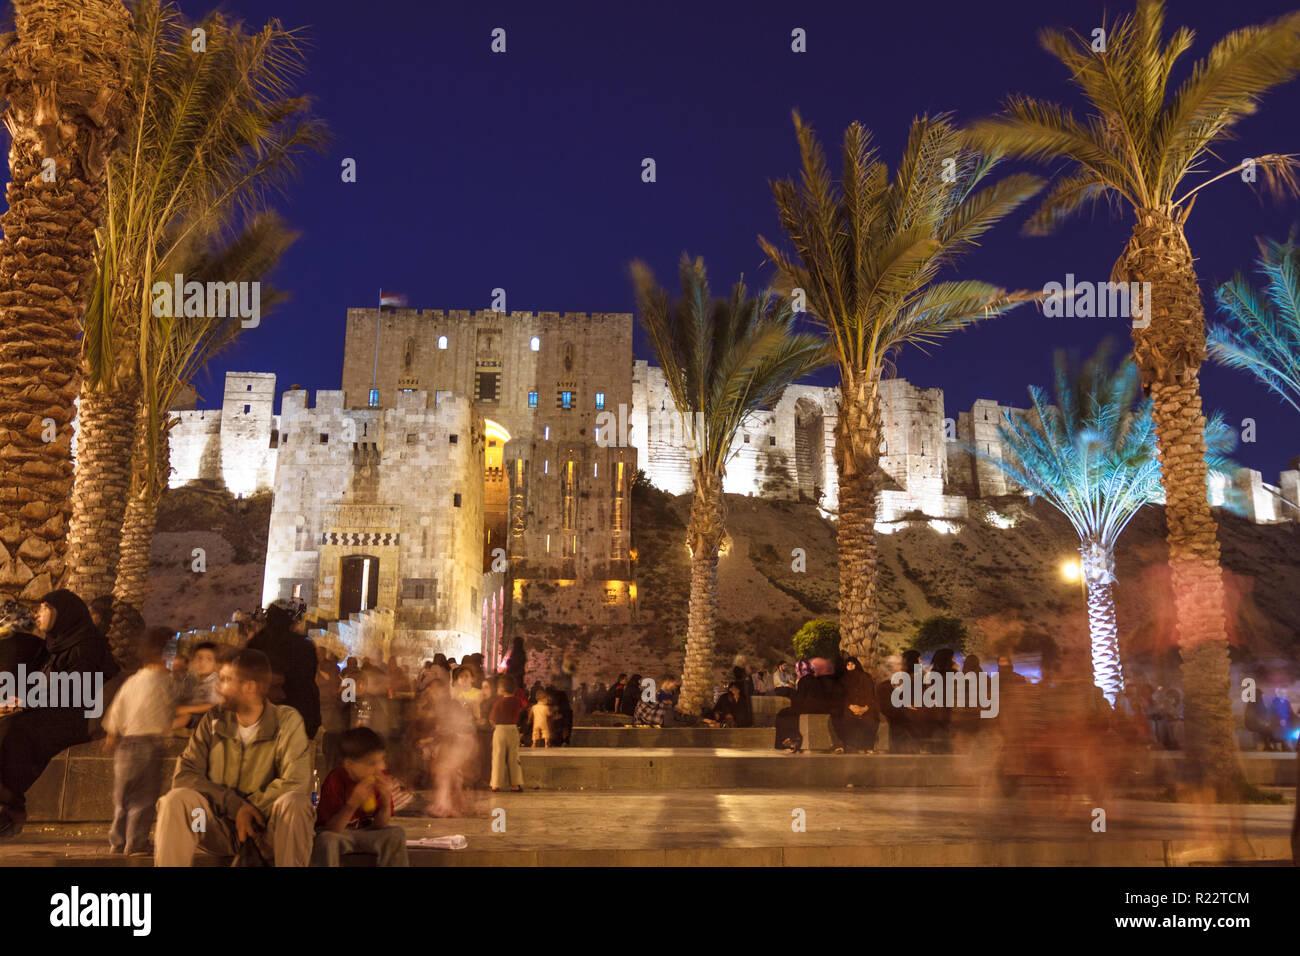 Aleppo, Aleppo Governorate, Syria : People sit outside the Illuminated Citadel of Aleppo, a large medieval fortified palace in the centre of the old c Stock Photo